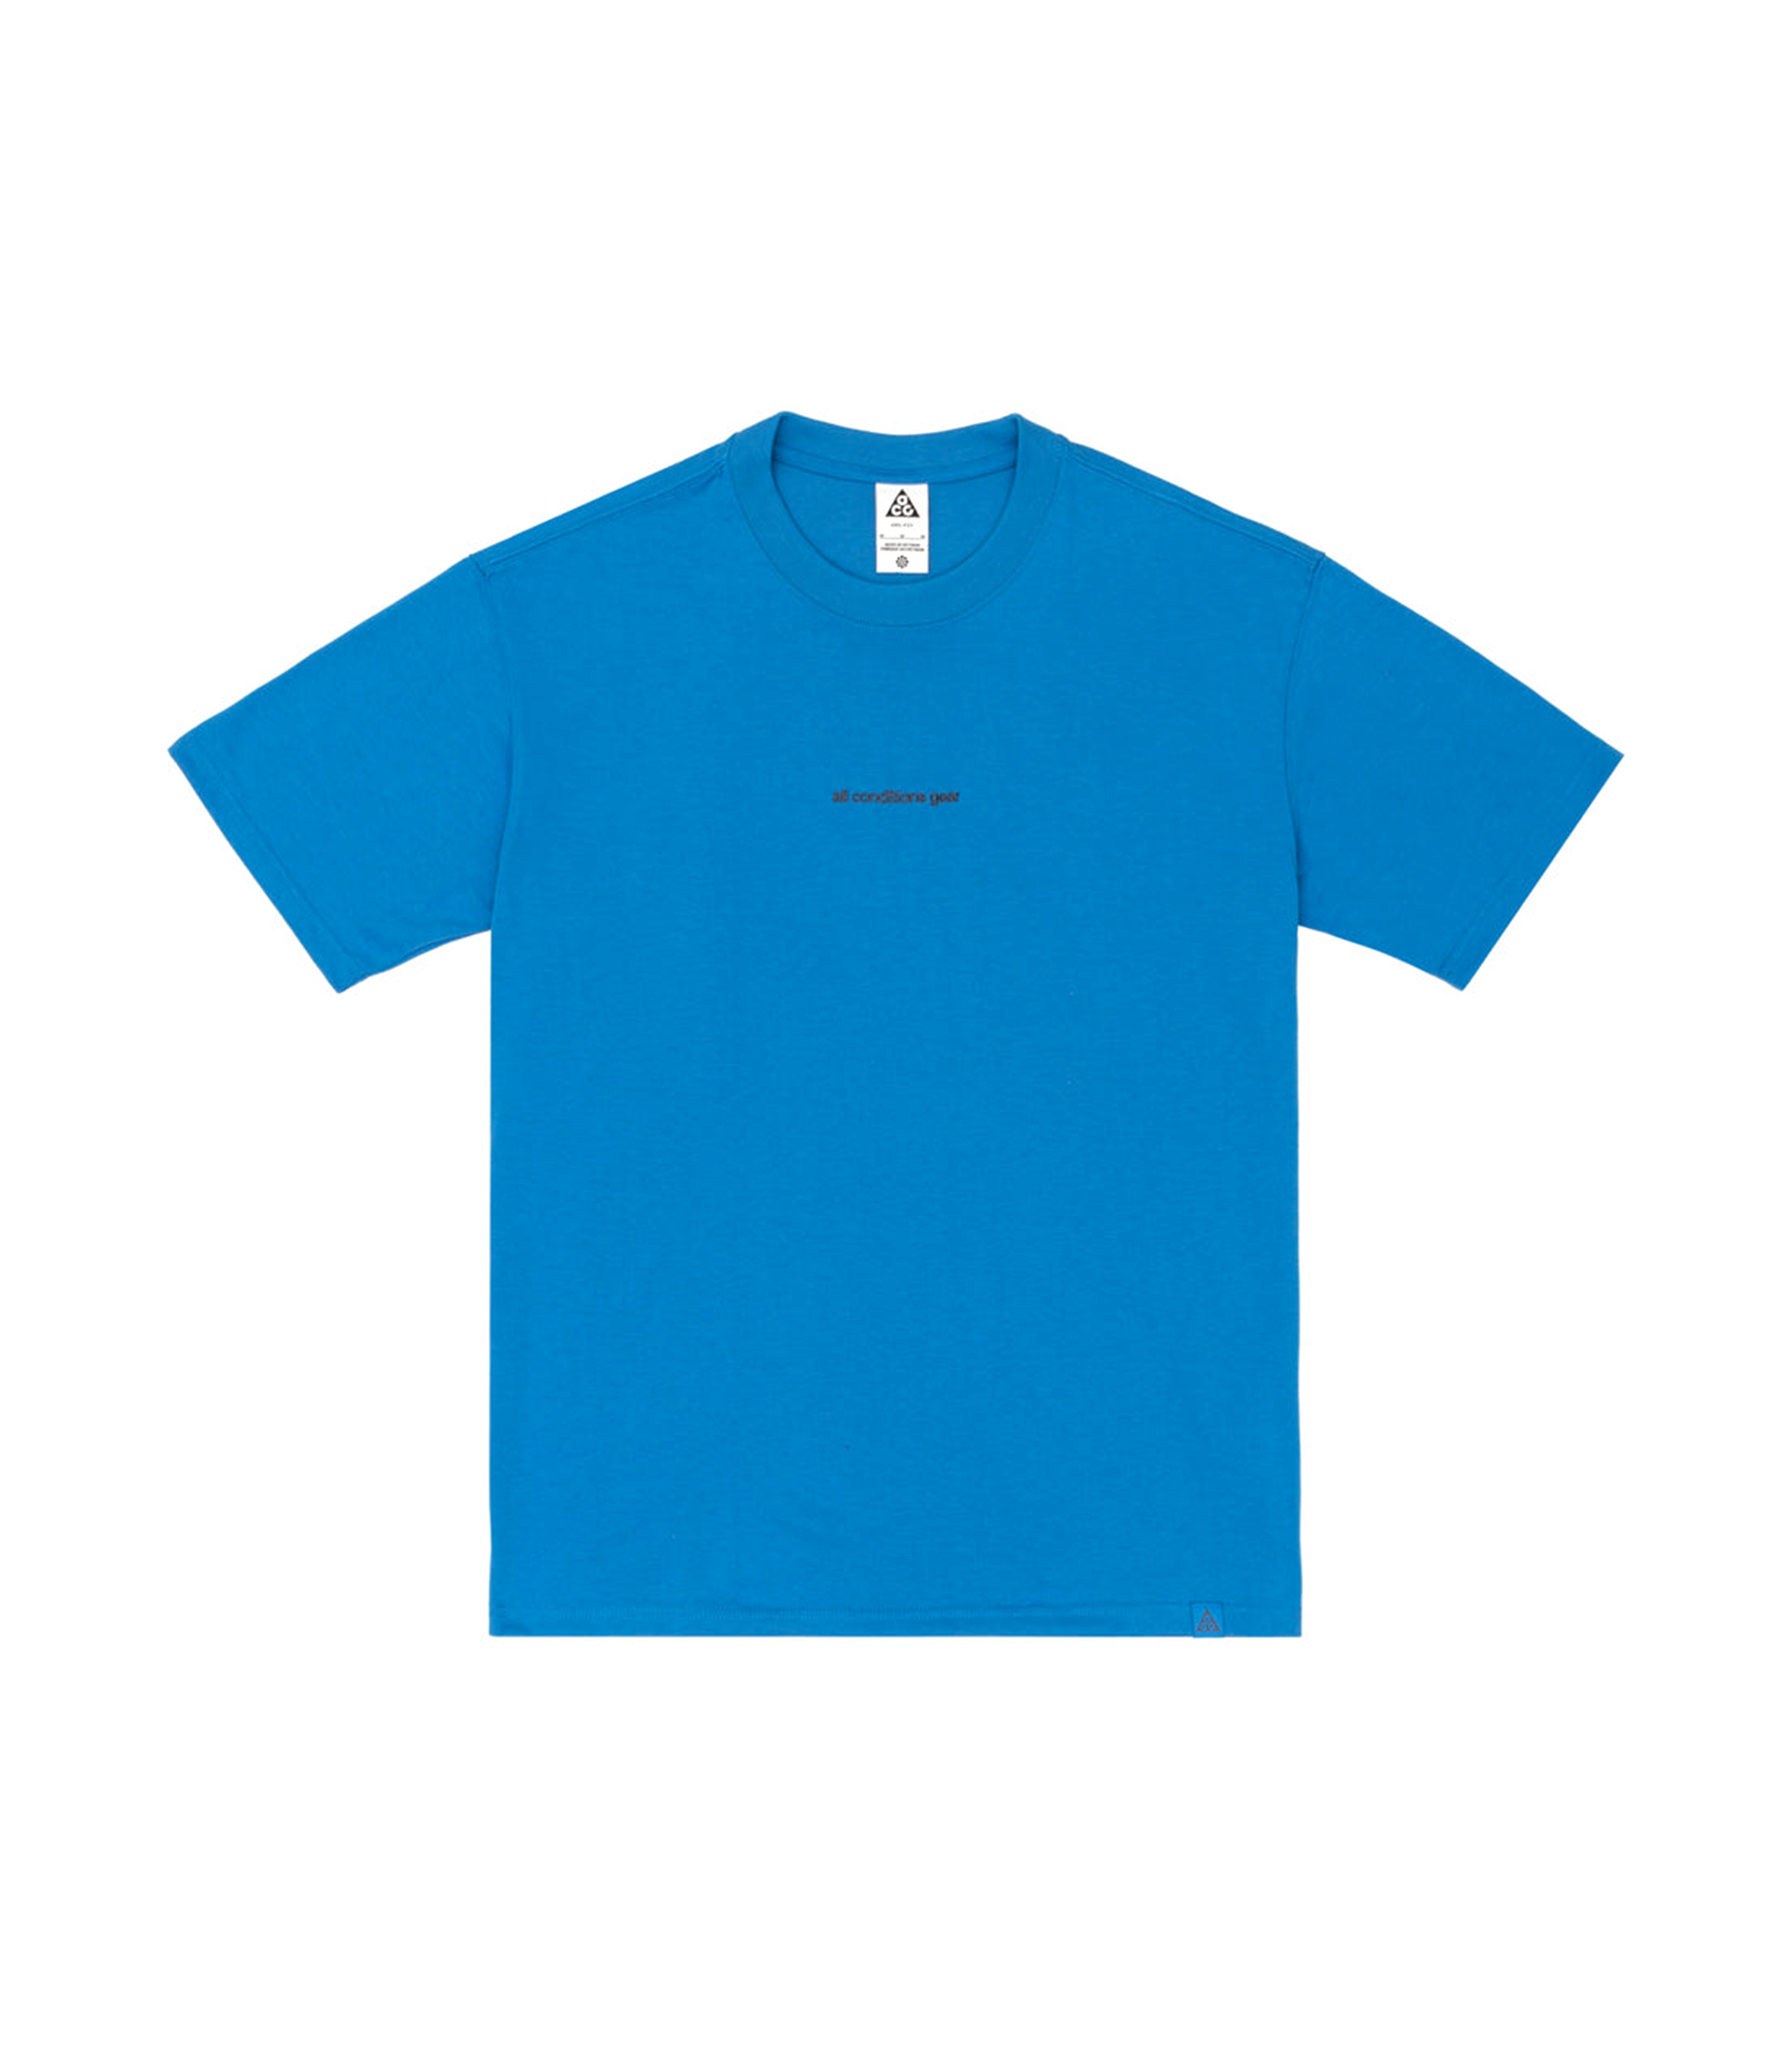 All Conditions T-shirt - Light Photo Blue